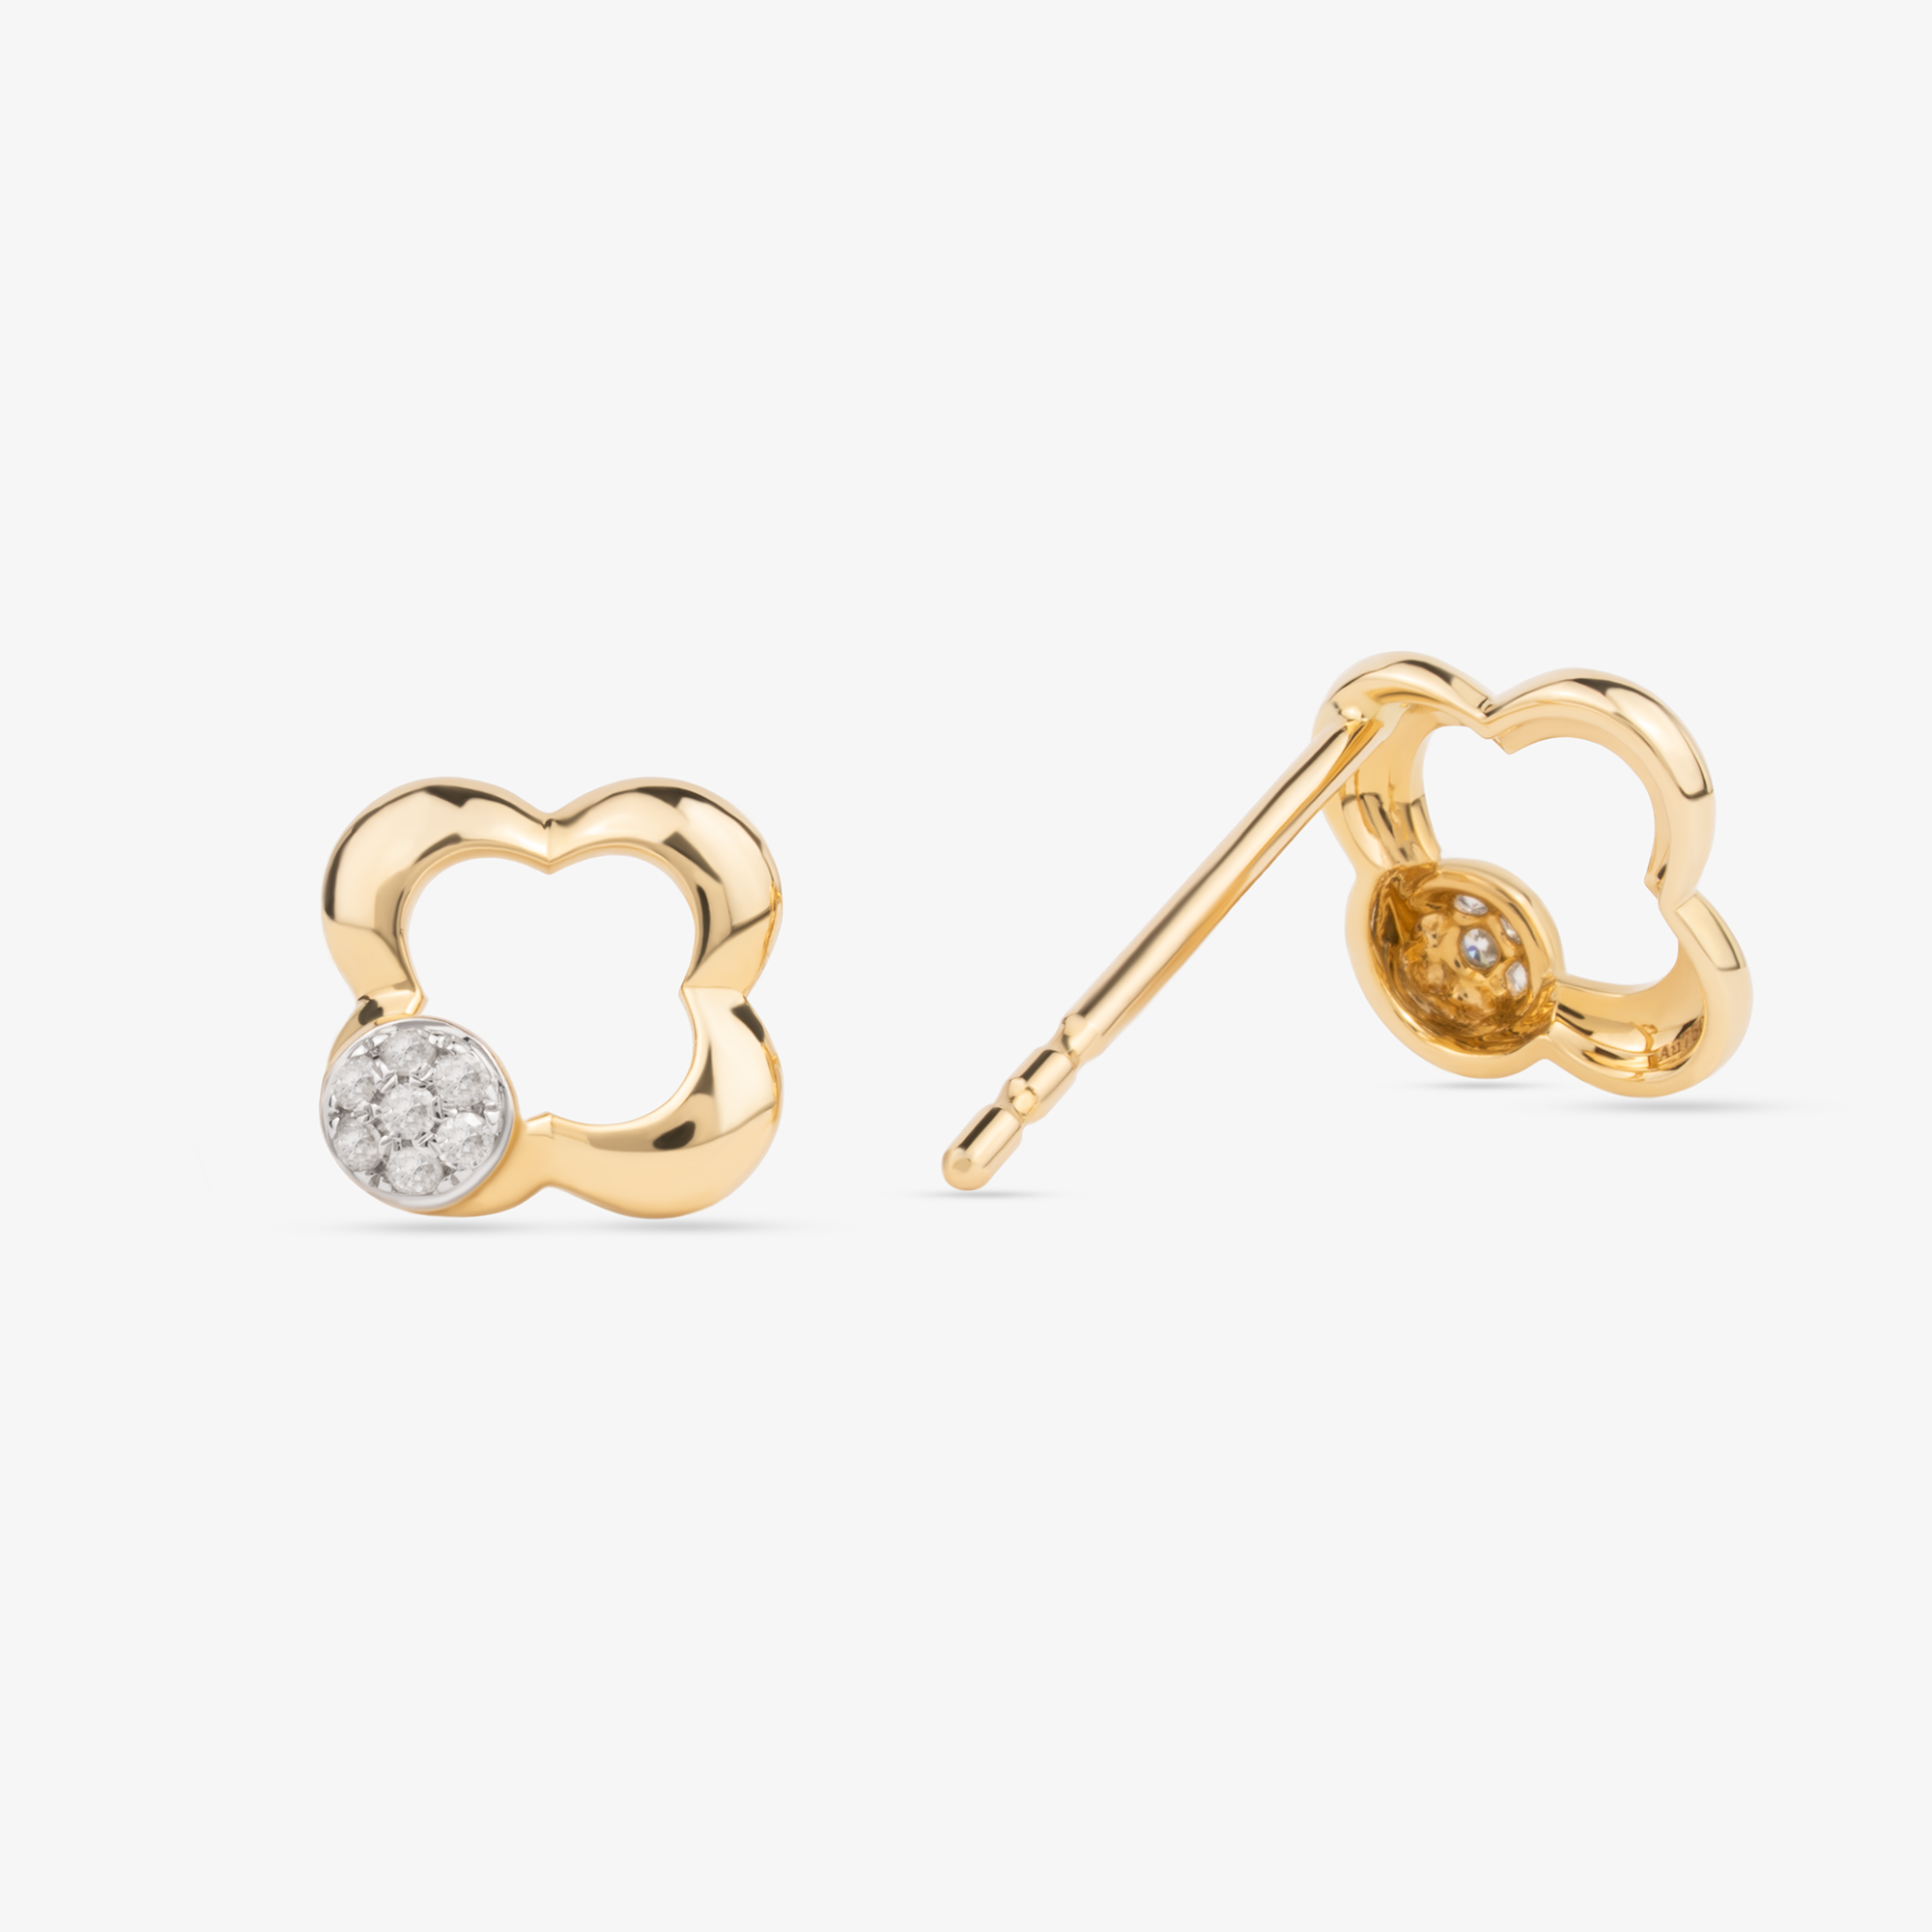 Clover Earrings In 18K Solid Yellow Gold With Diamonds